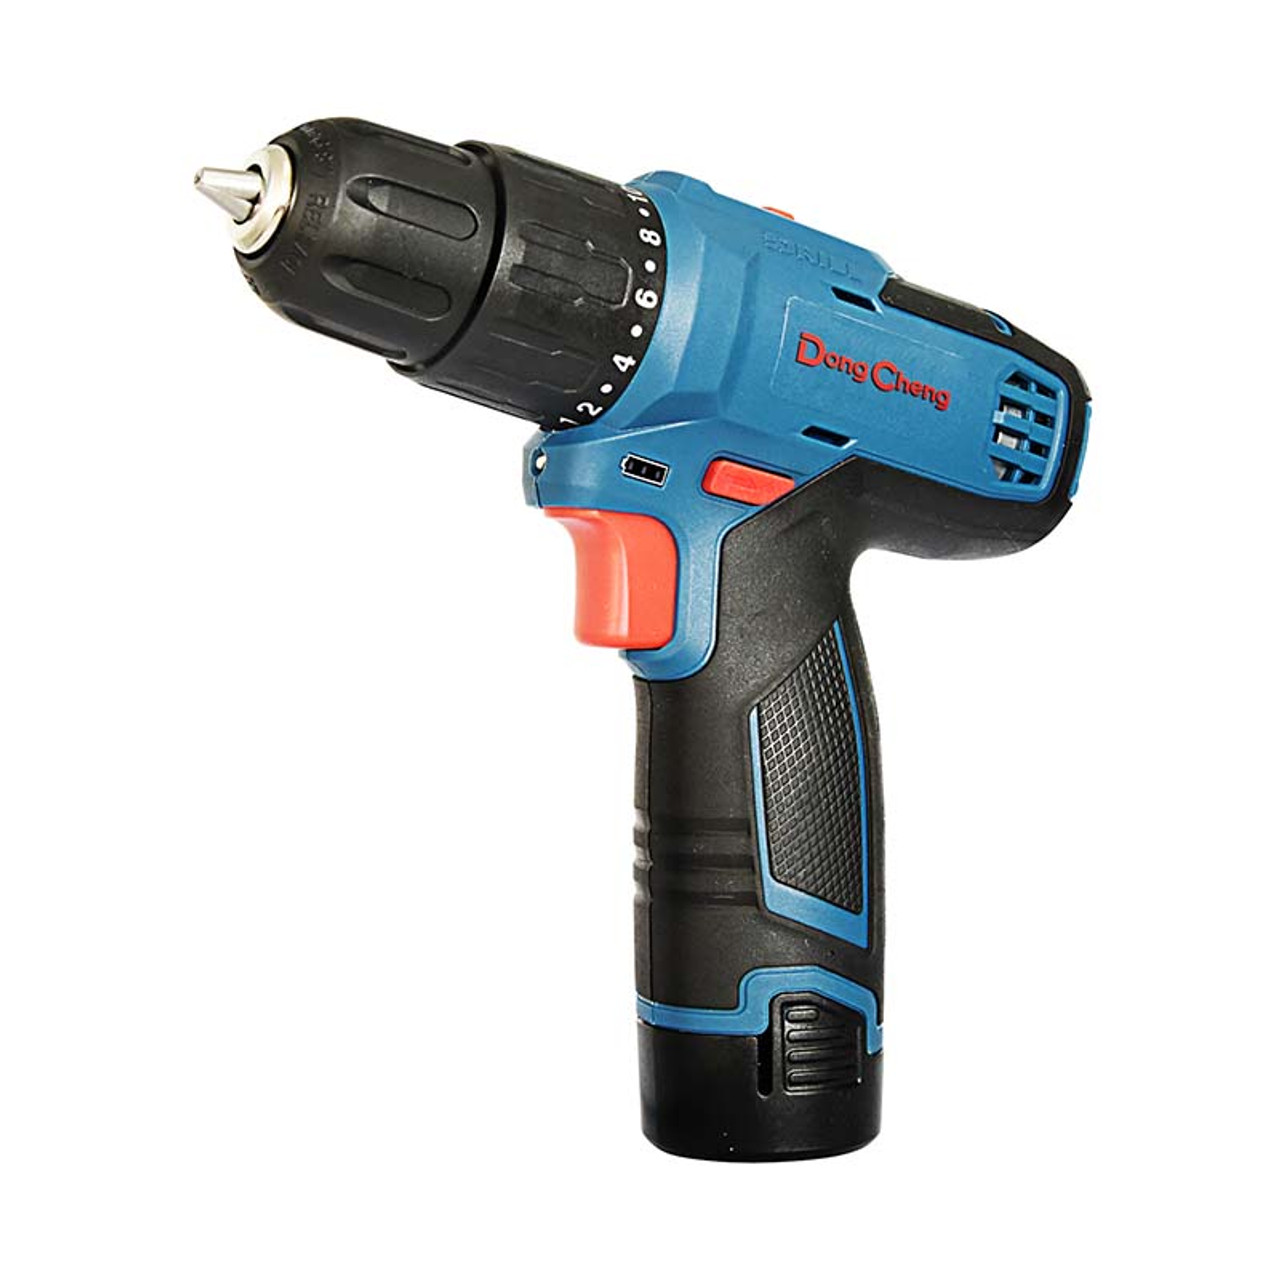 https://www.gz-supplies.com/product_images/uploaded_images/dongcheng-cordless-driver-drill-dcjz1202i.jpg